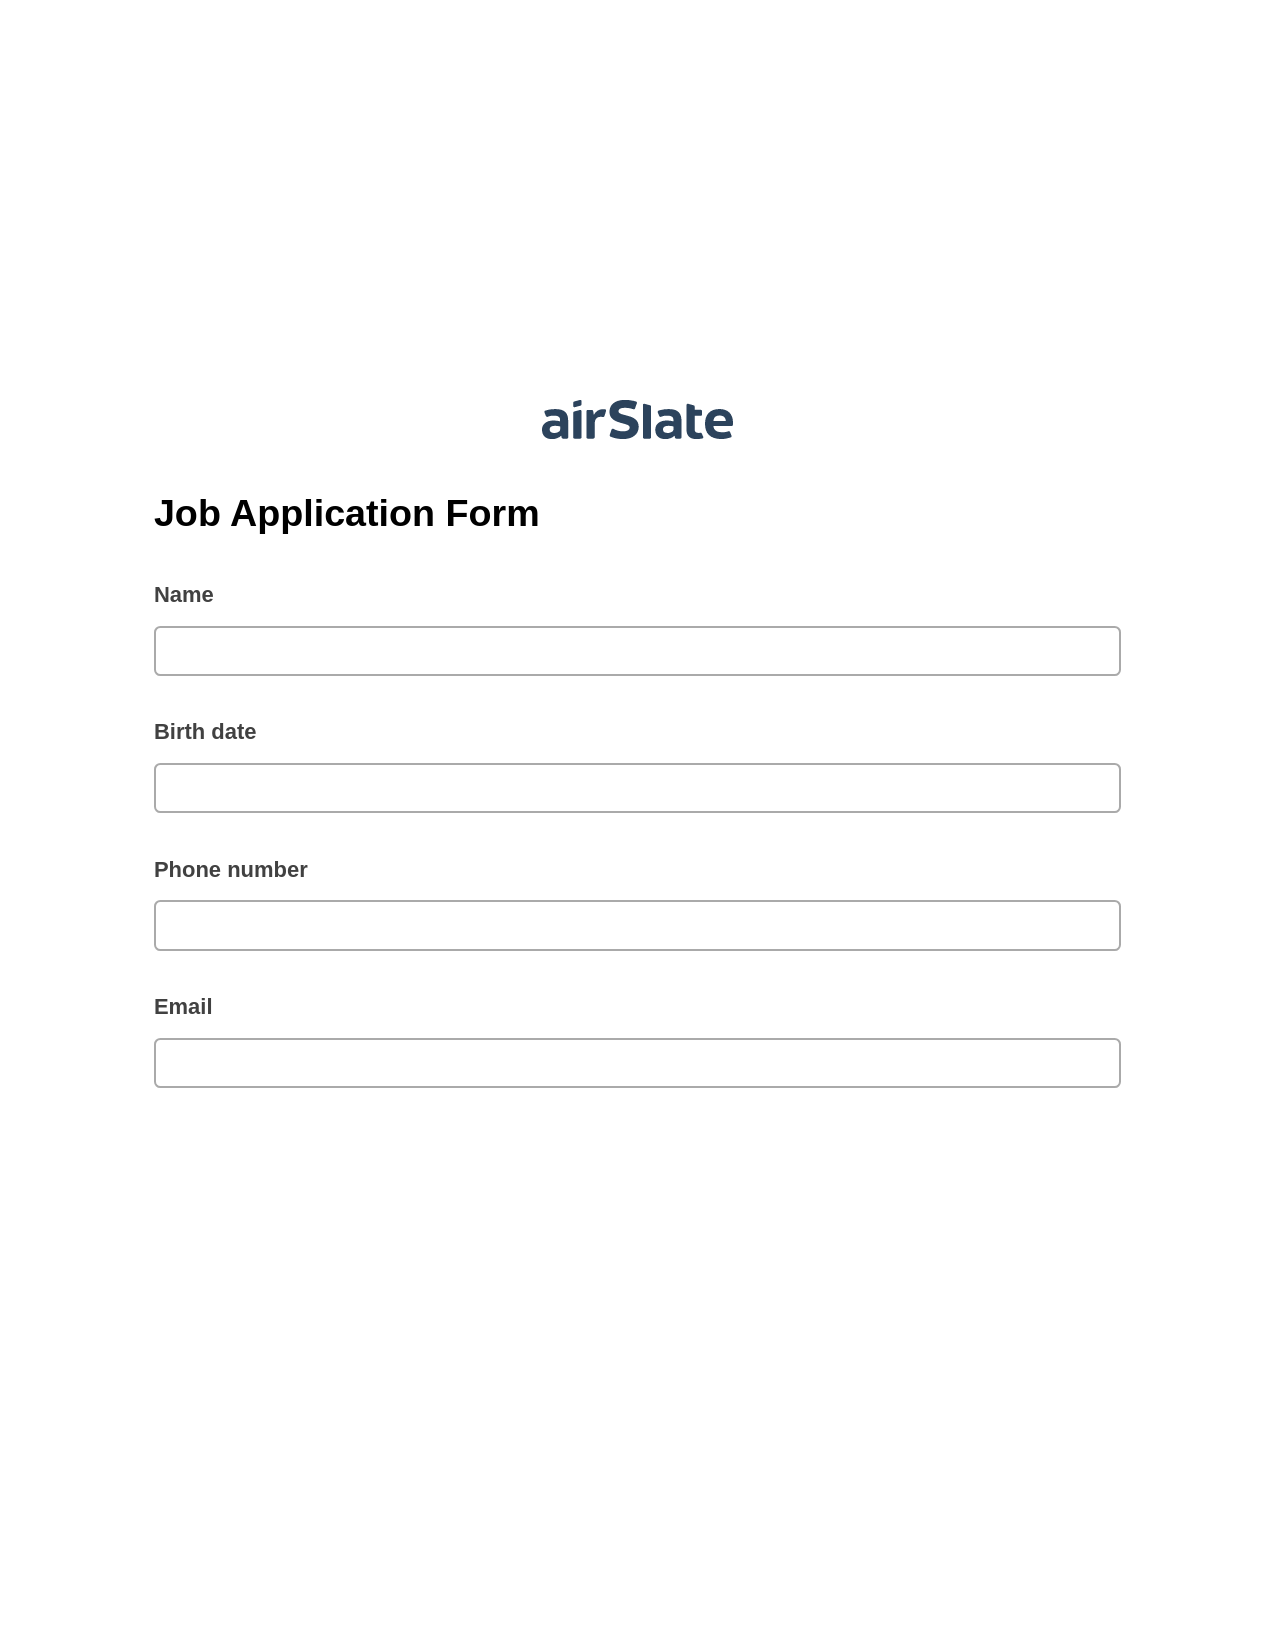 Multirole Job Application Form Pre-fill from CSV File Bot, Create slate bot, Archive to SharePoint Folder Bot